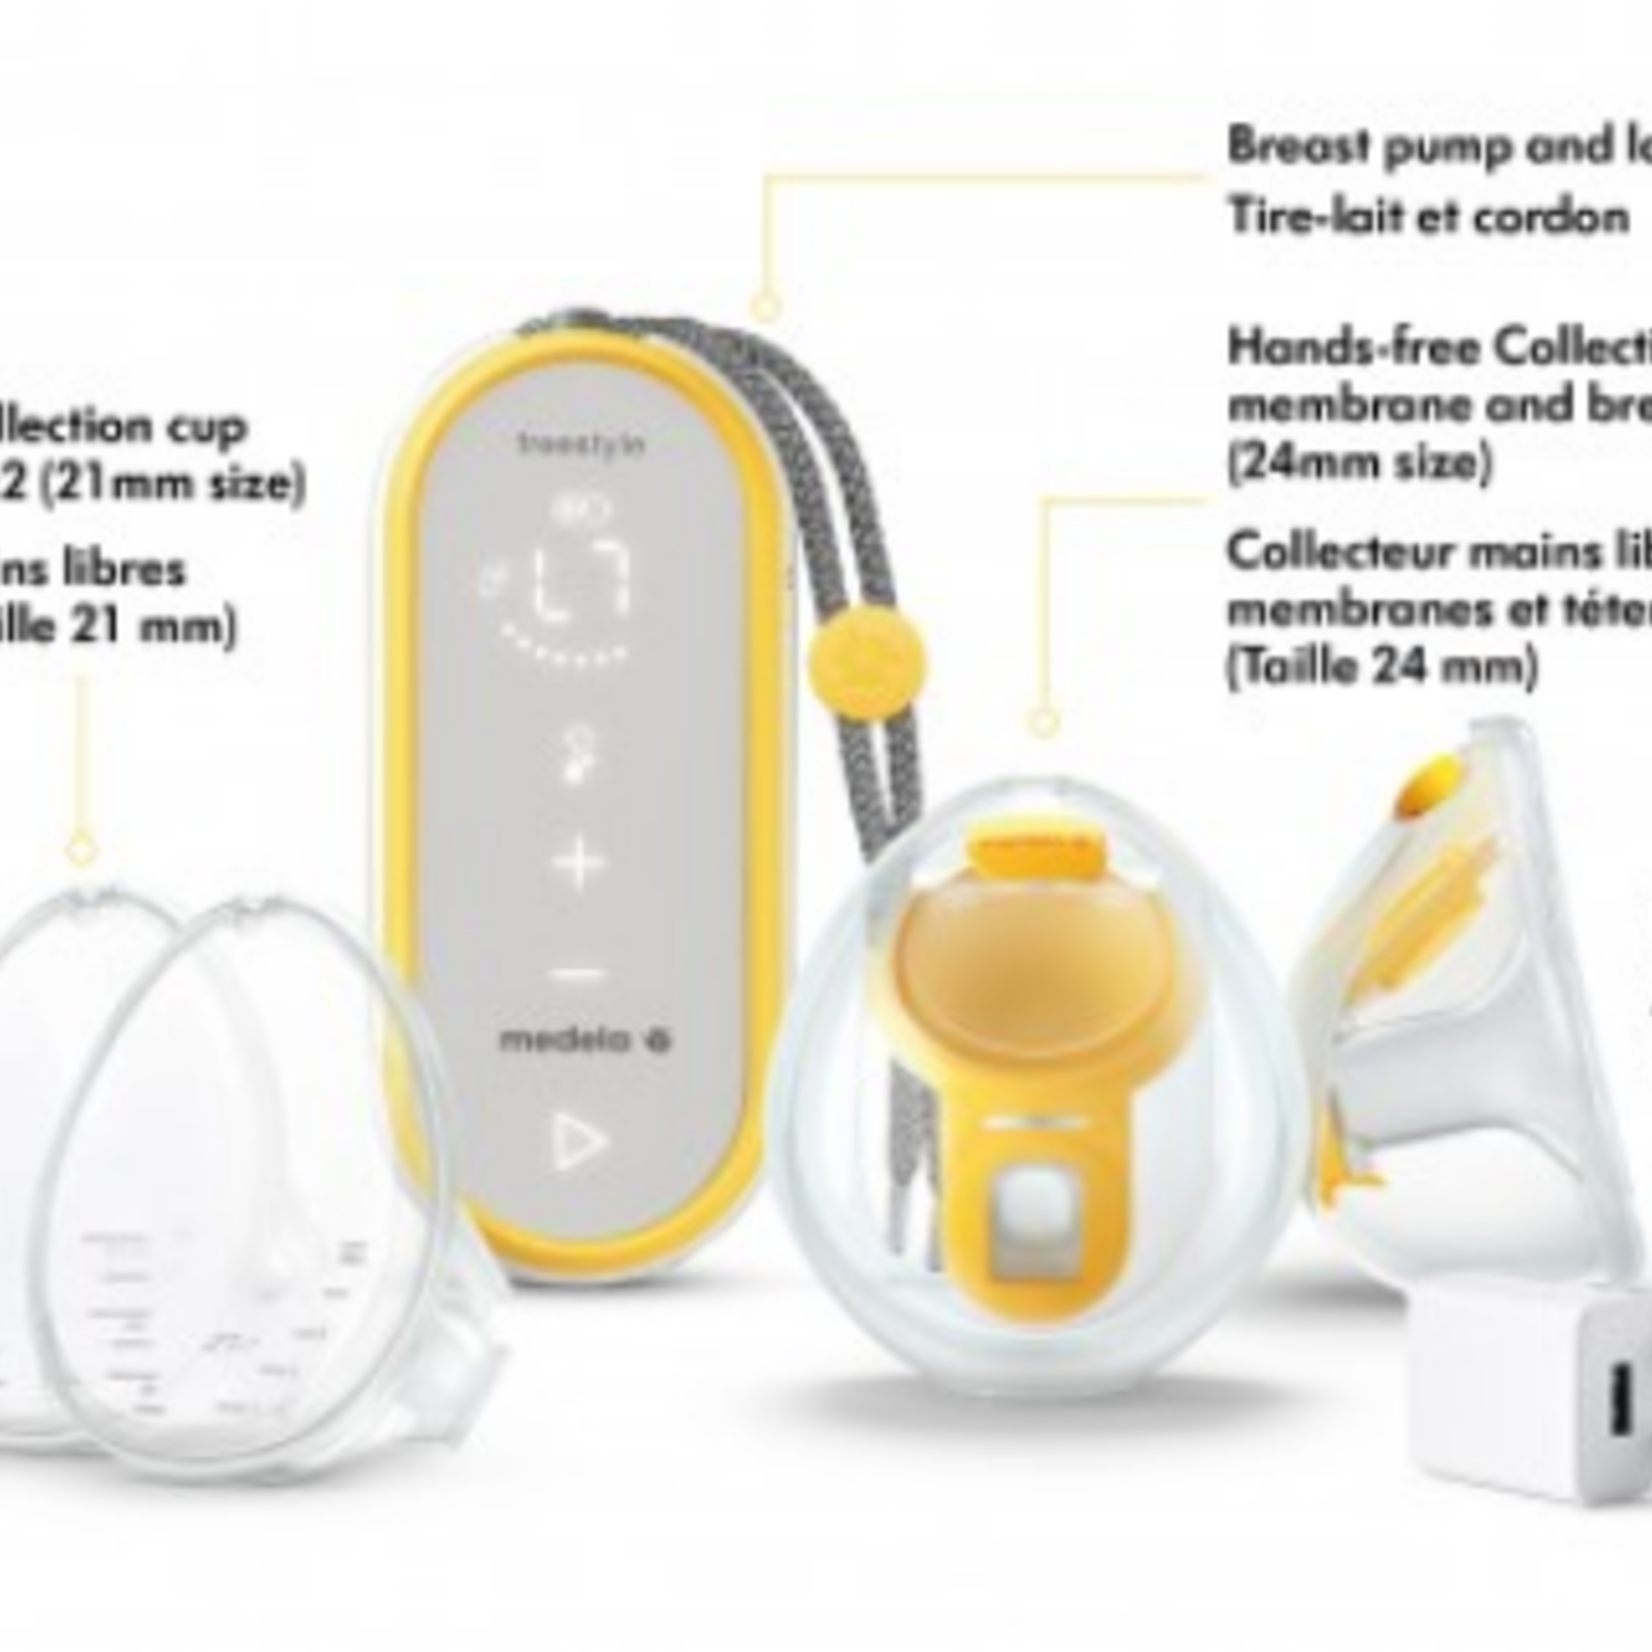 Medela Kenya - If you want to try hands-free pumping